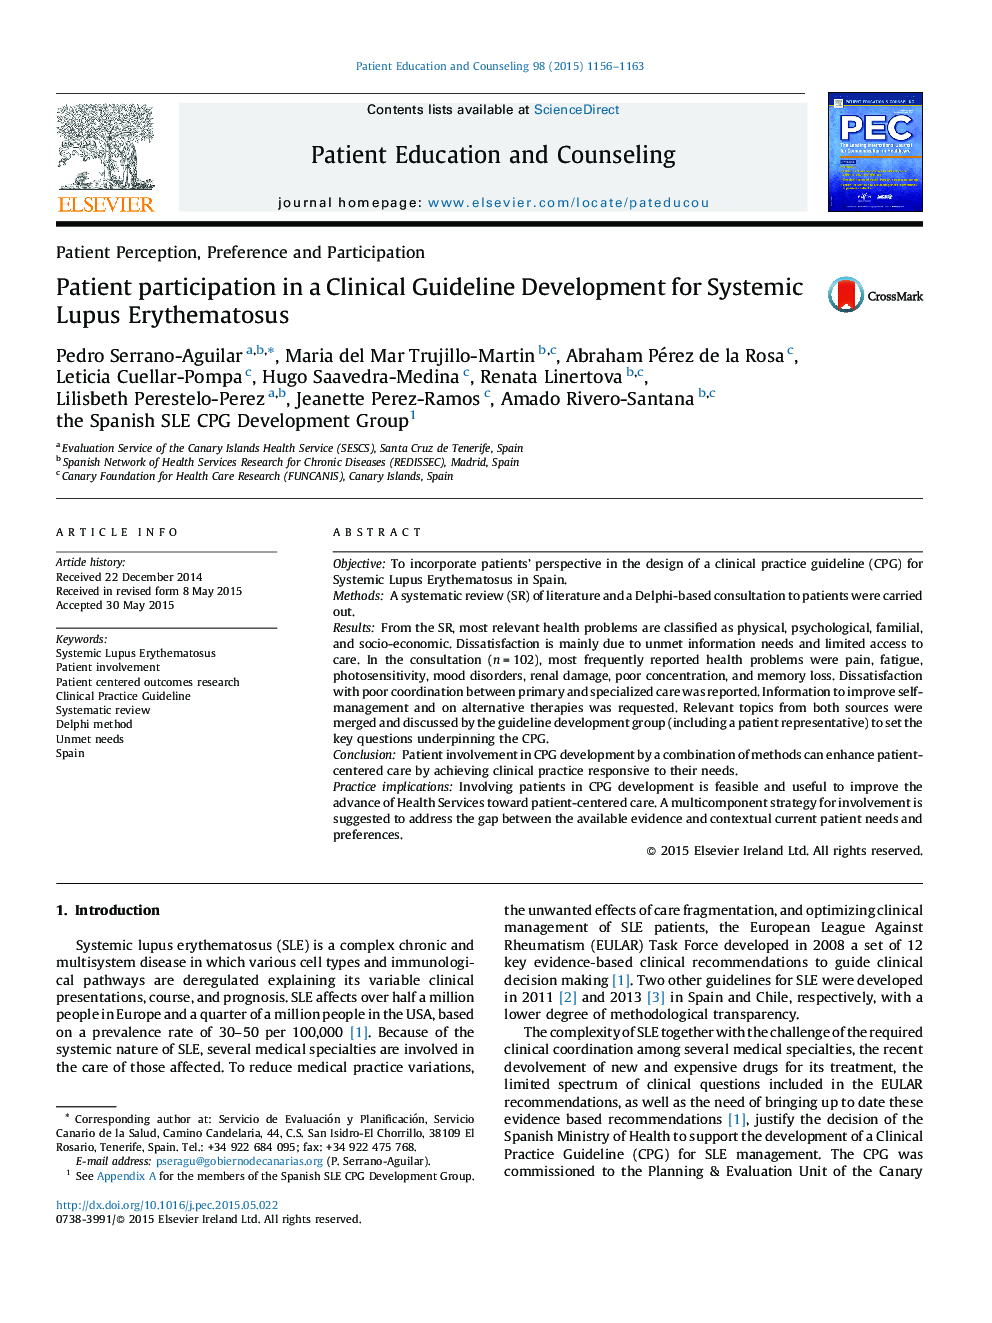 Patient participation in a Clinical Guideline Development for Systemic Lupus Erythematosus